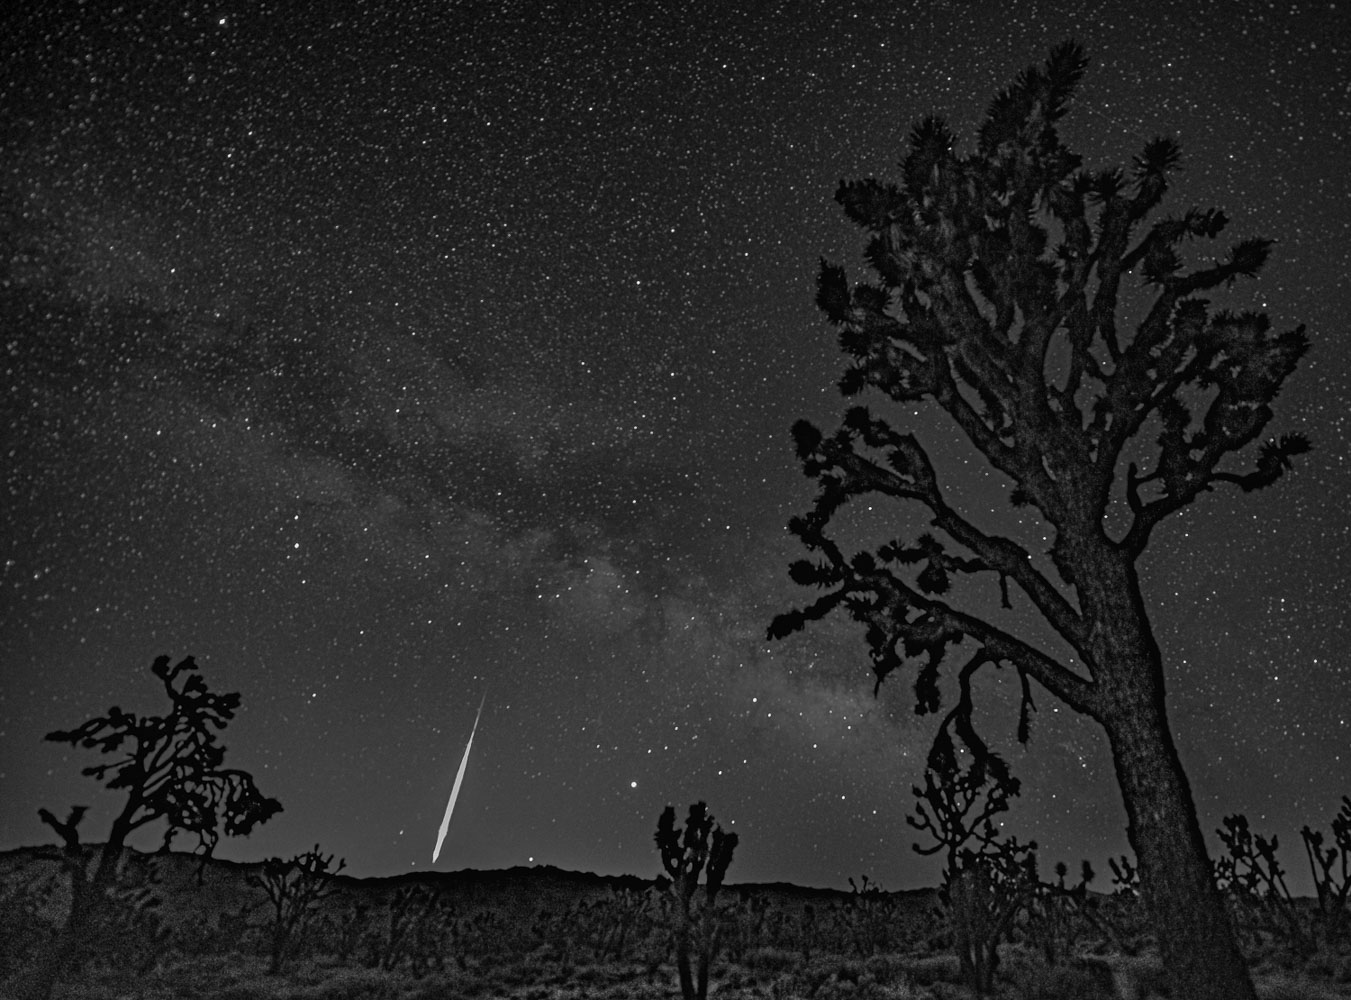 shooting star, Mohave desert ca, mohave desert, Milky Way, nightscapes